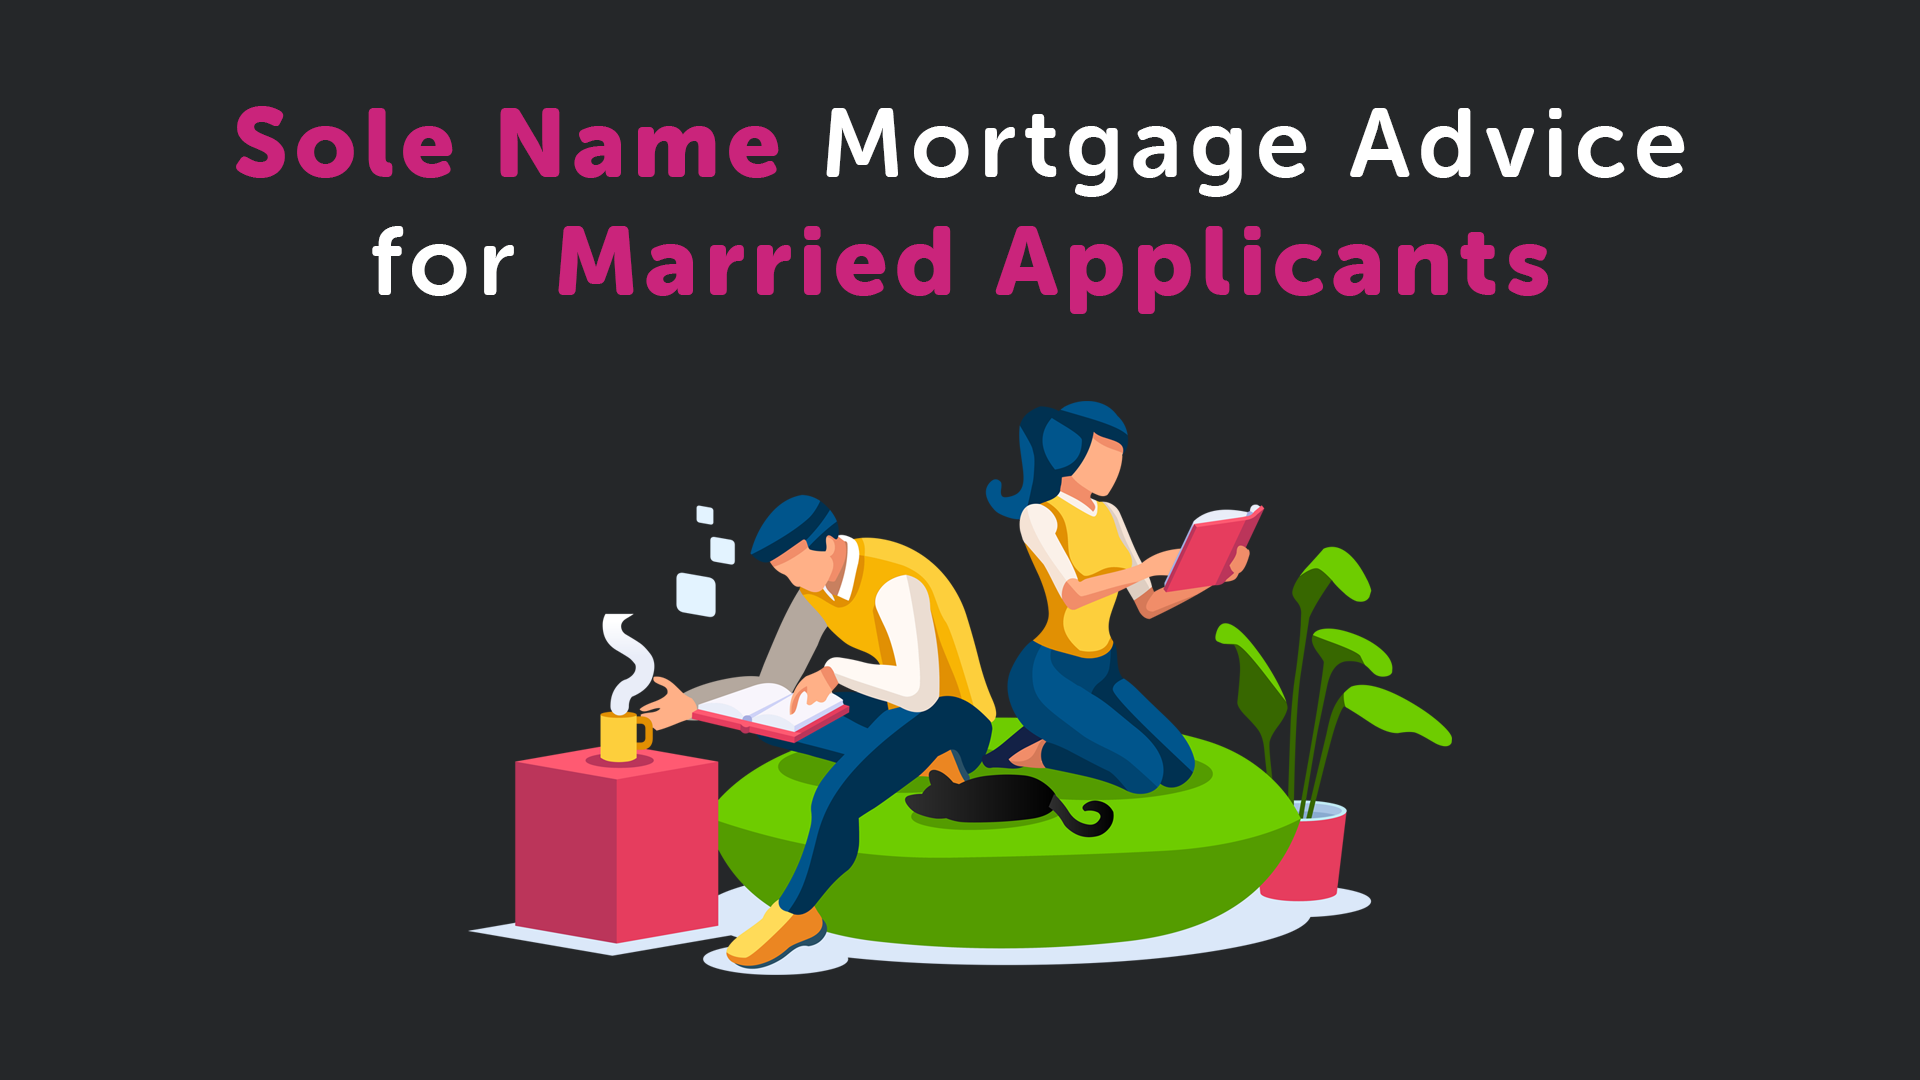 Sole Name Mortgage Advice for a Married Applicant